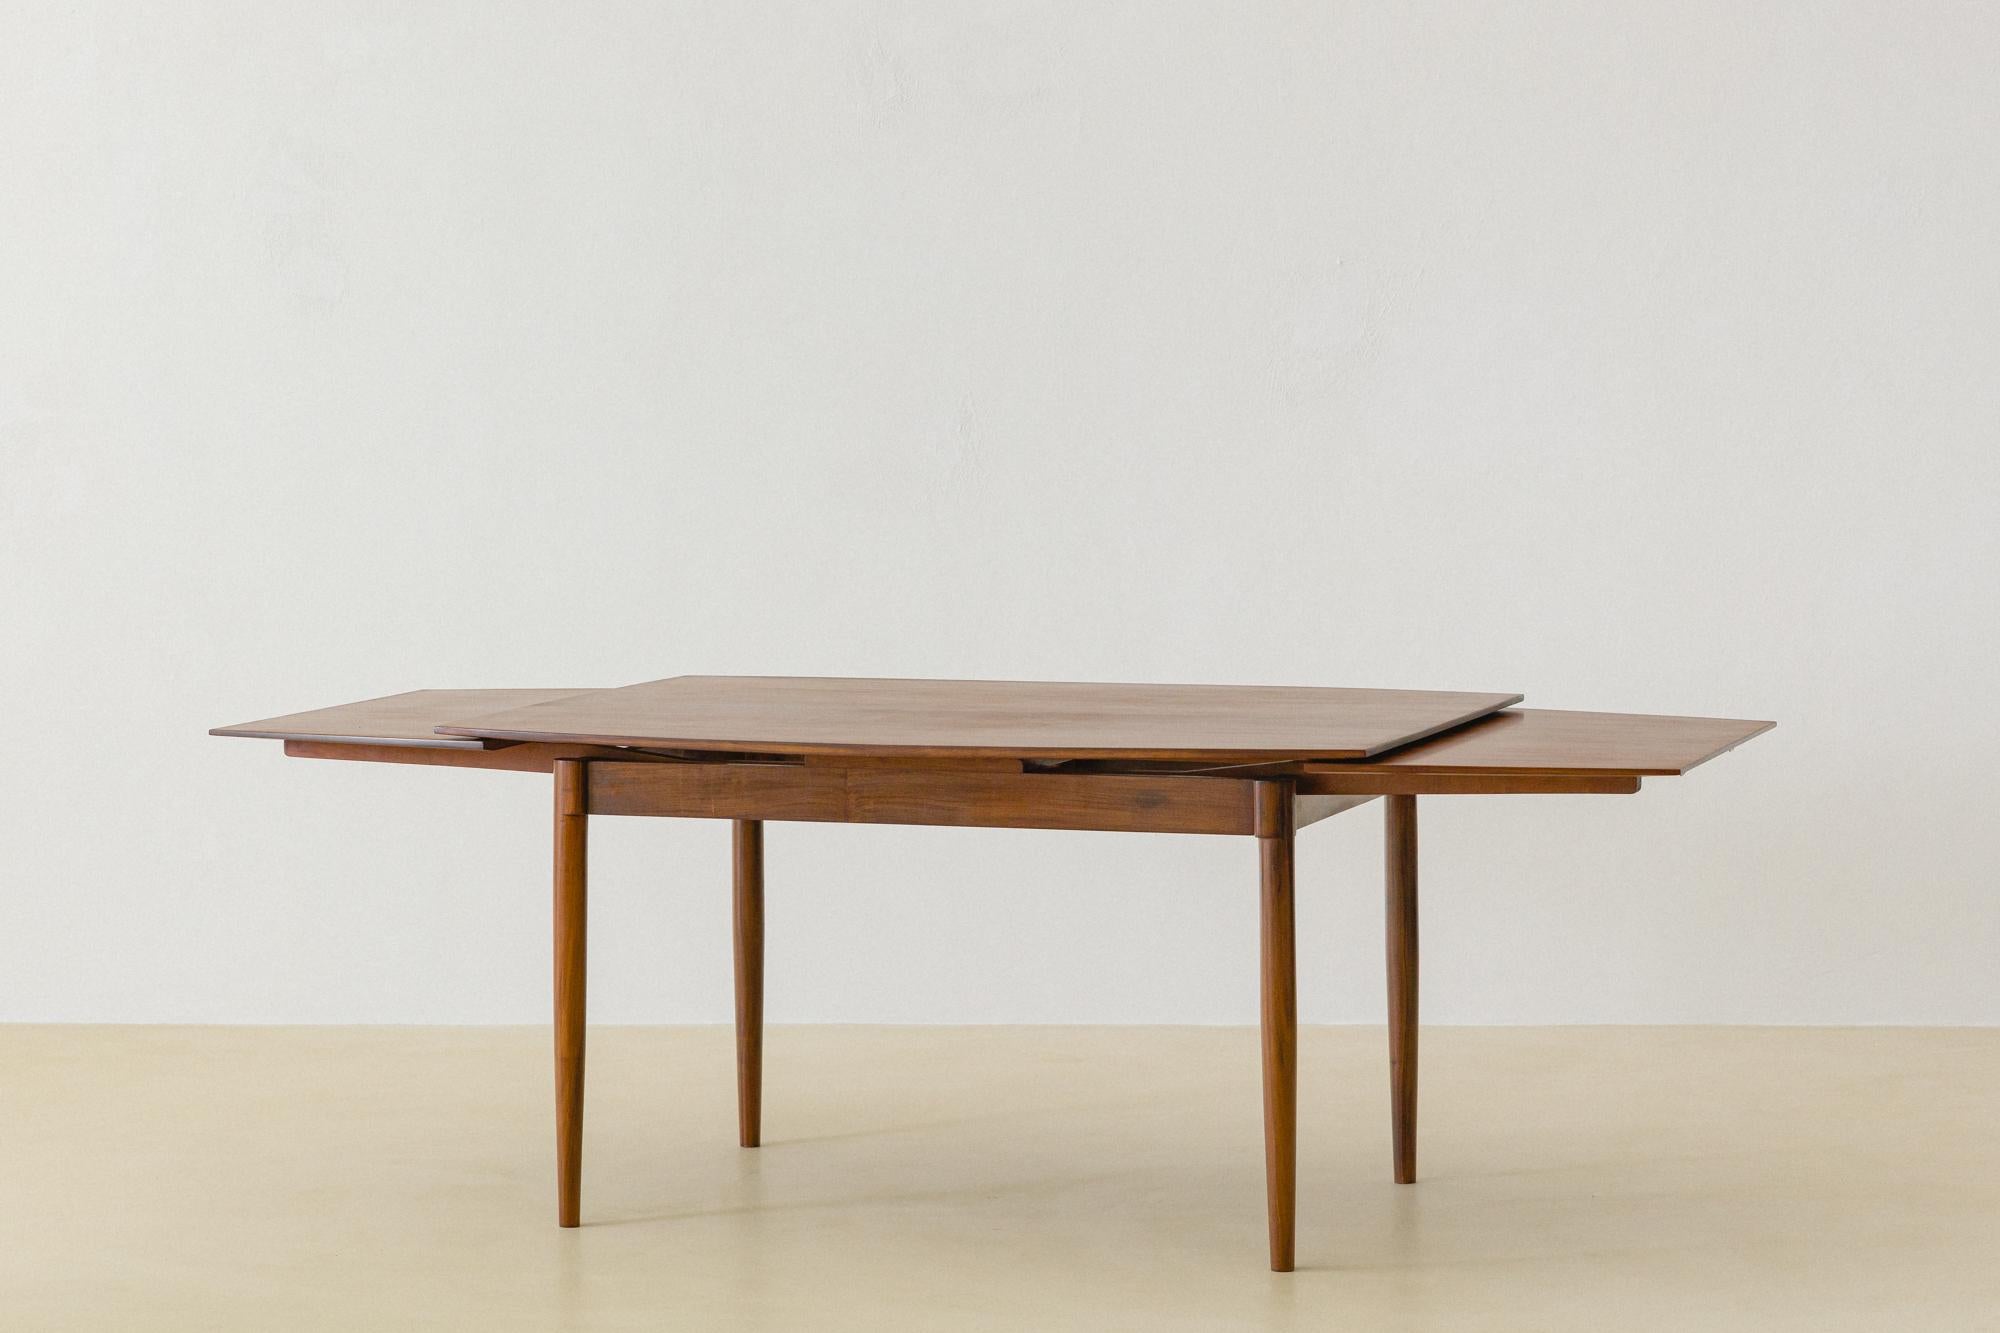 Wood Expandable Dining Table in Caviuna by Carlo Hauner, Brazilian Midcentury, 1950s For Sale